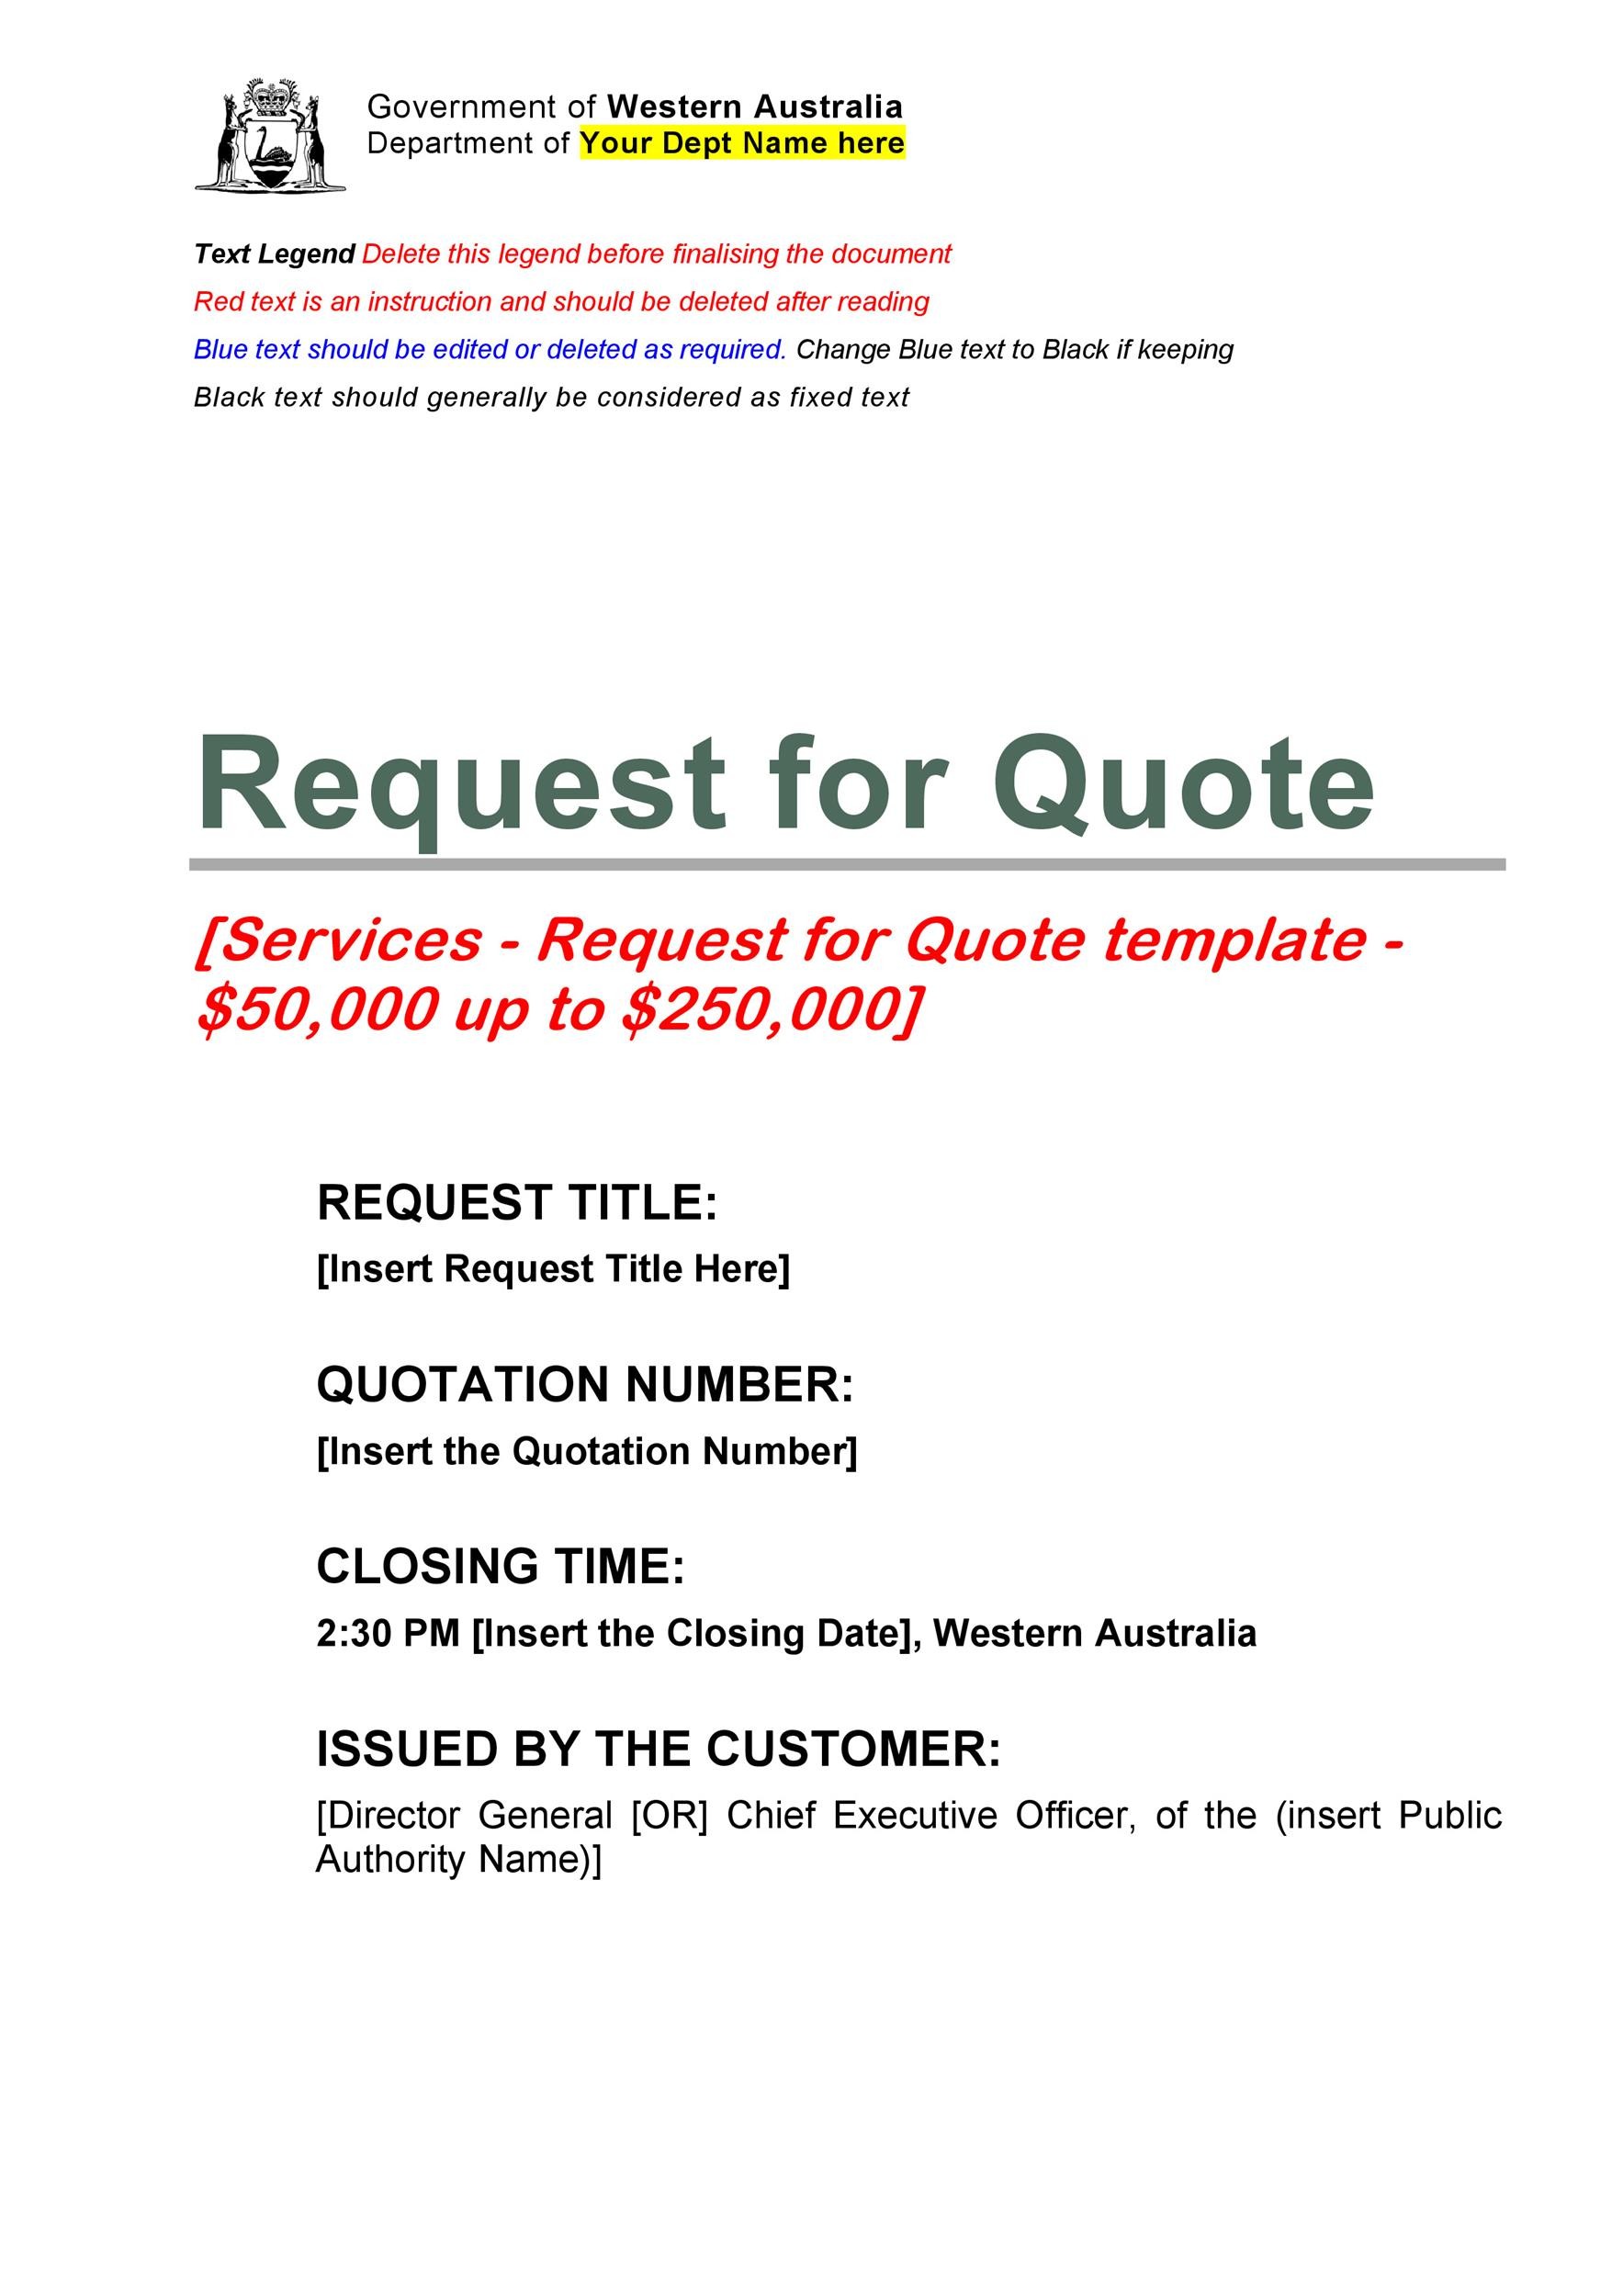 Sample Letter For Quotation Request from templatelab.com